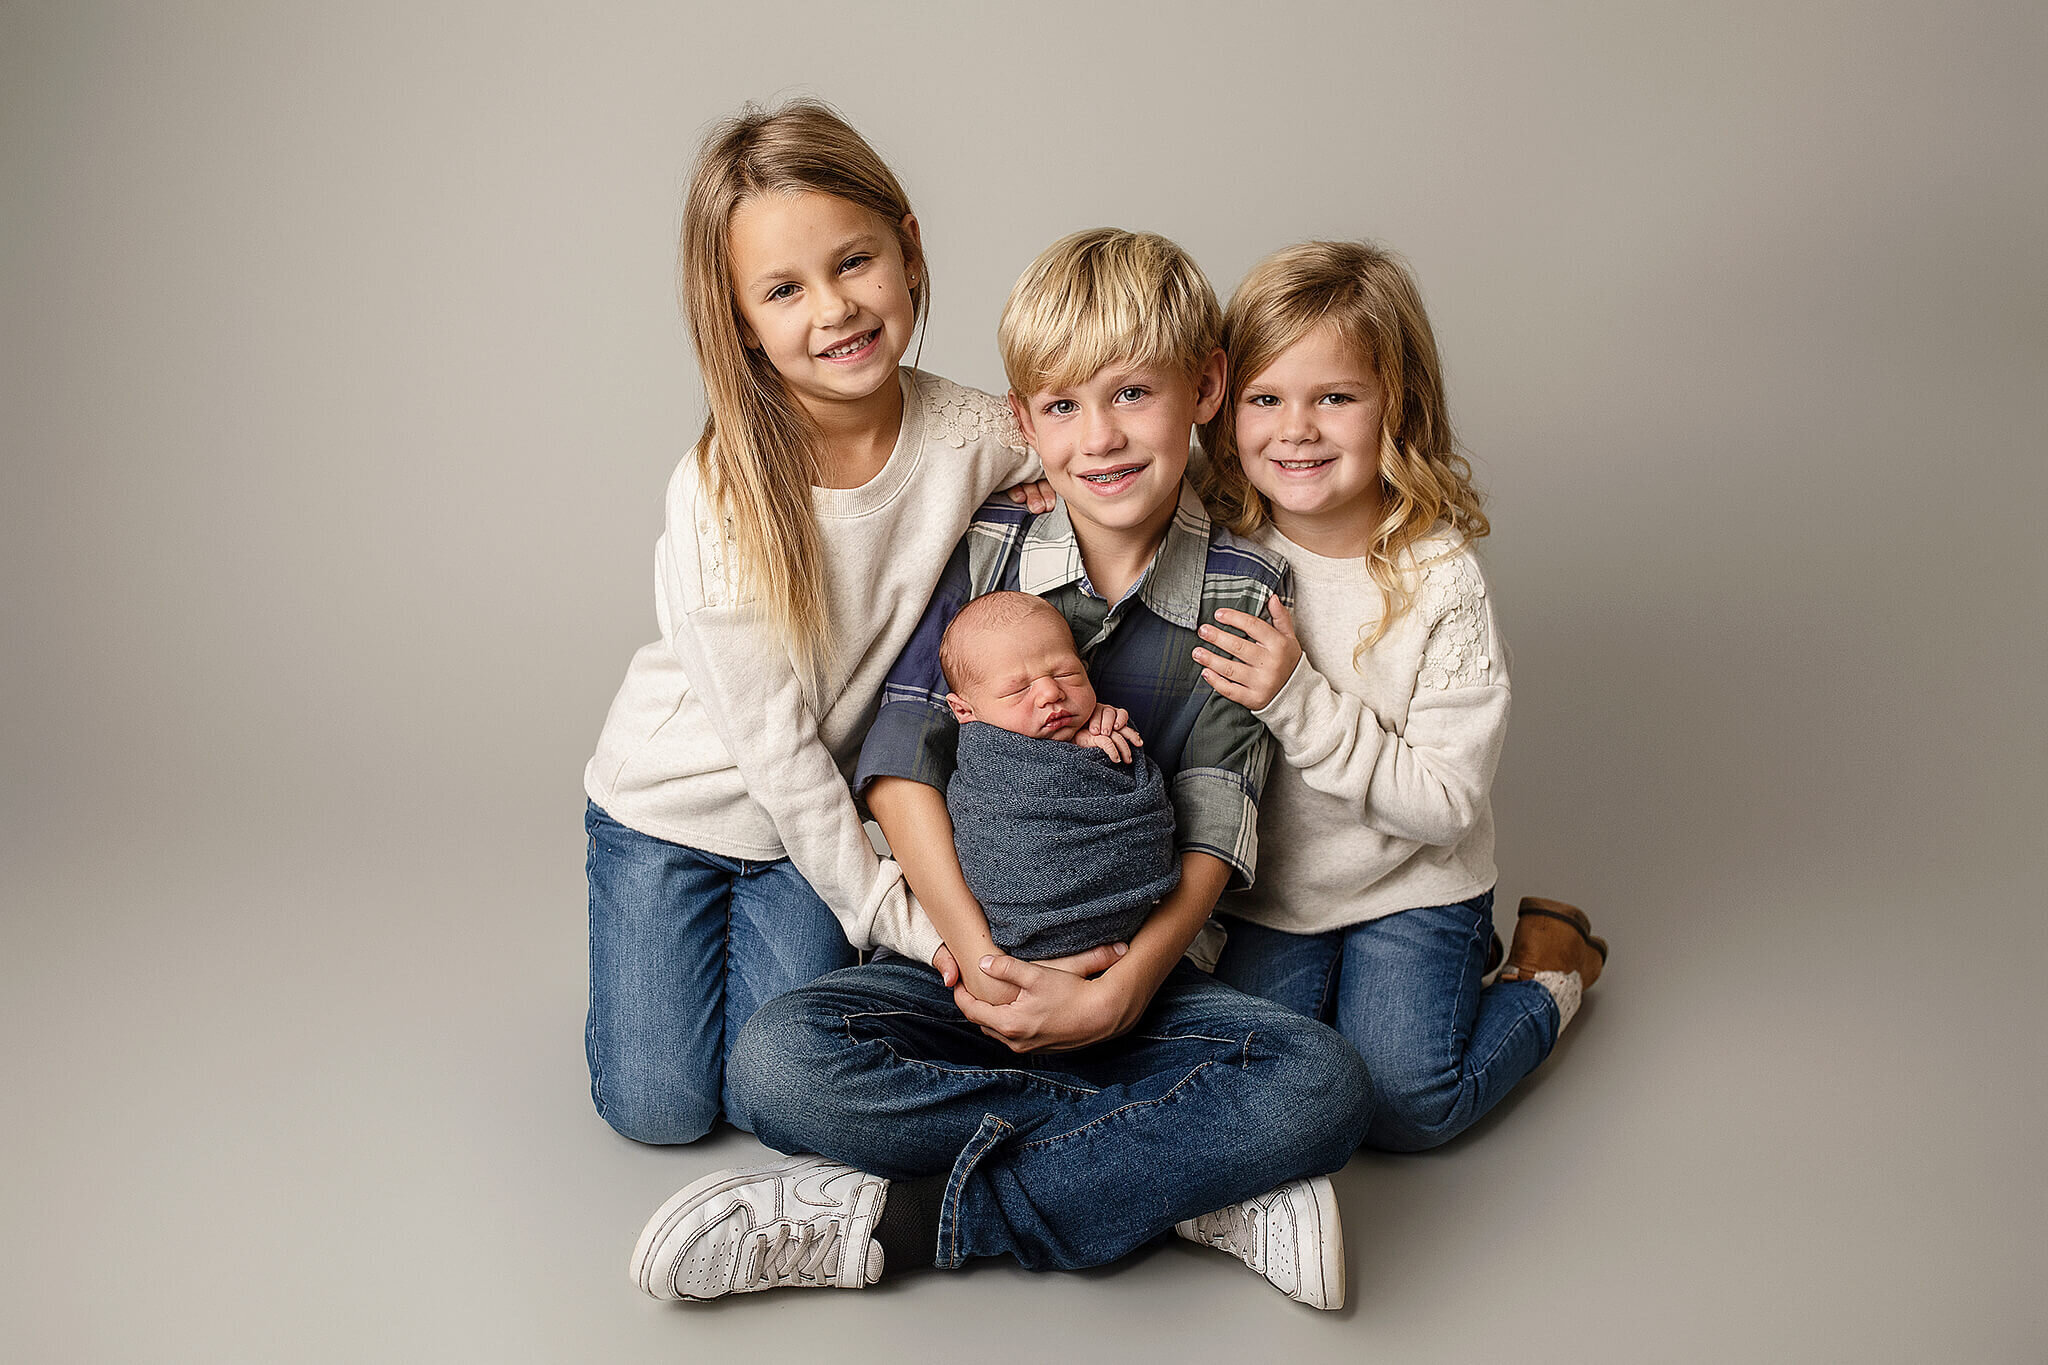 Three older siblings with the newborn brother.  Kids sitting on grey paper background and big brother is holding baby brother who is wrapped in blue wrap.